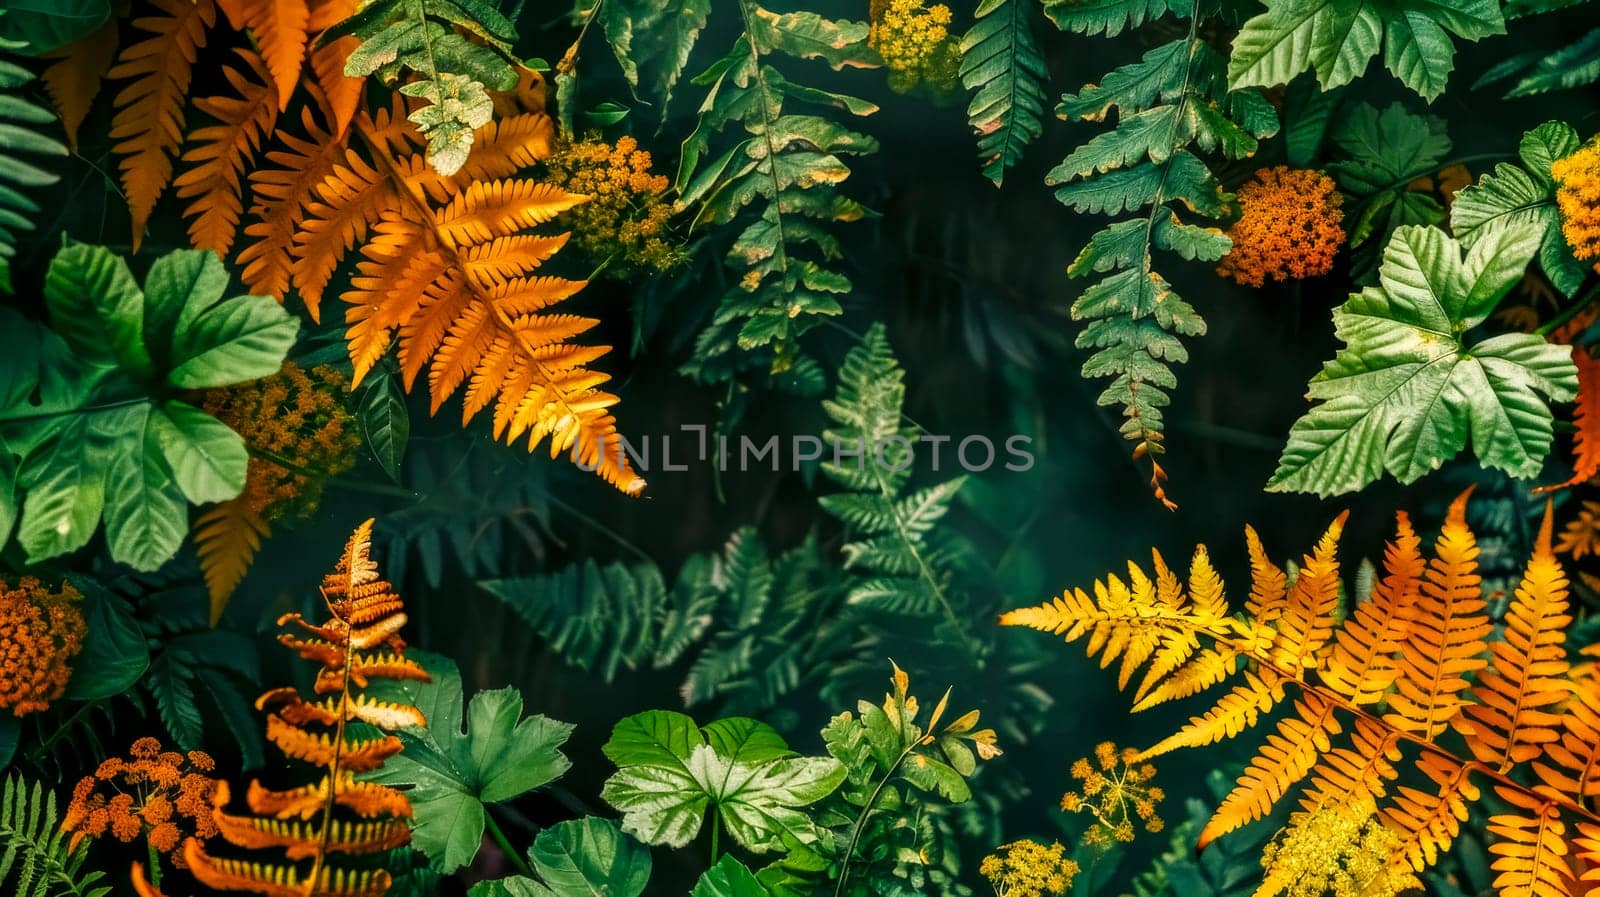 Lush greenery with a mix of vibrant orange ferns creates a dense tropical background